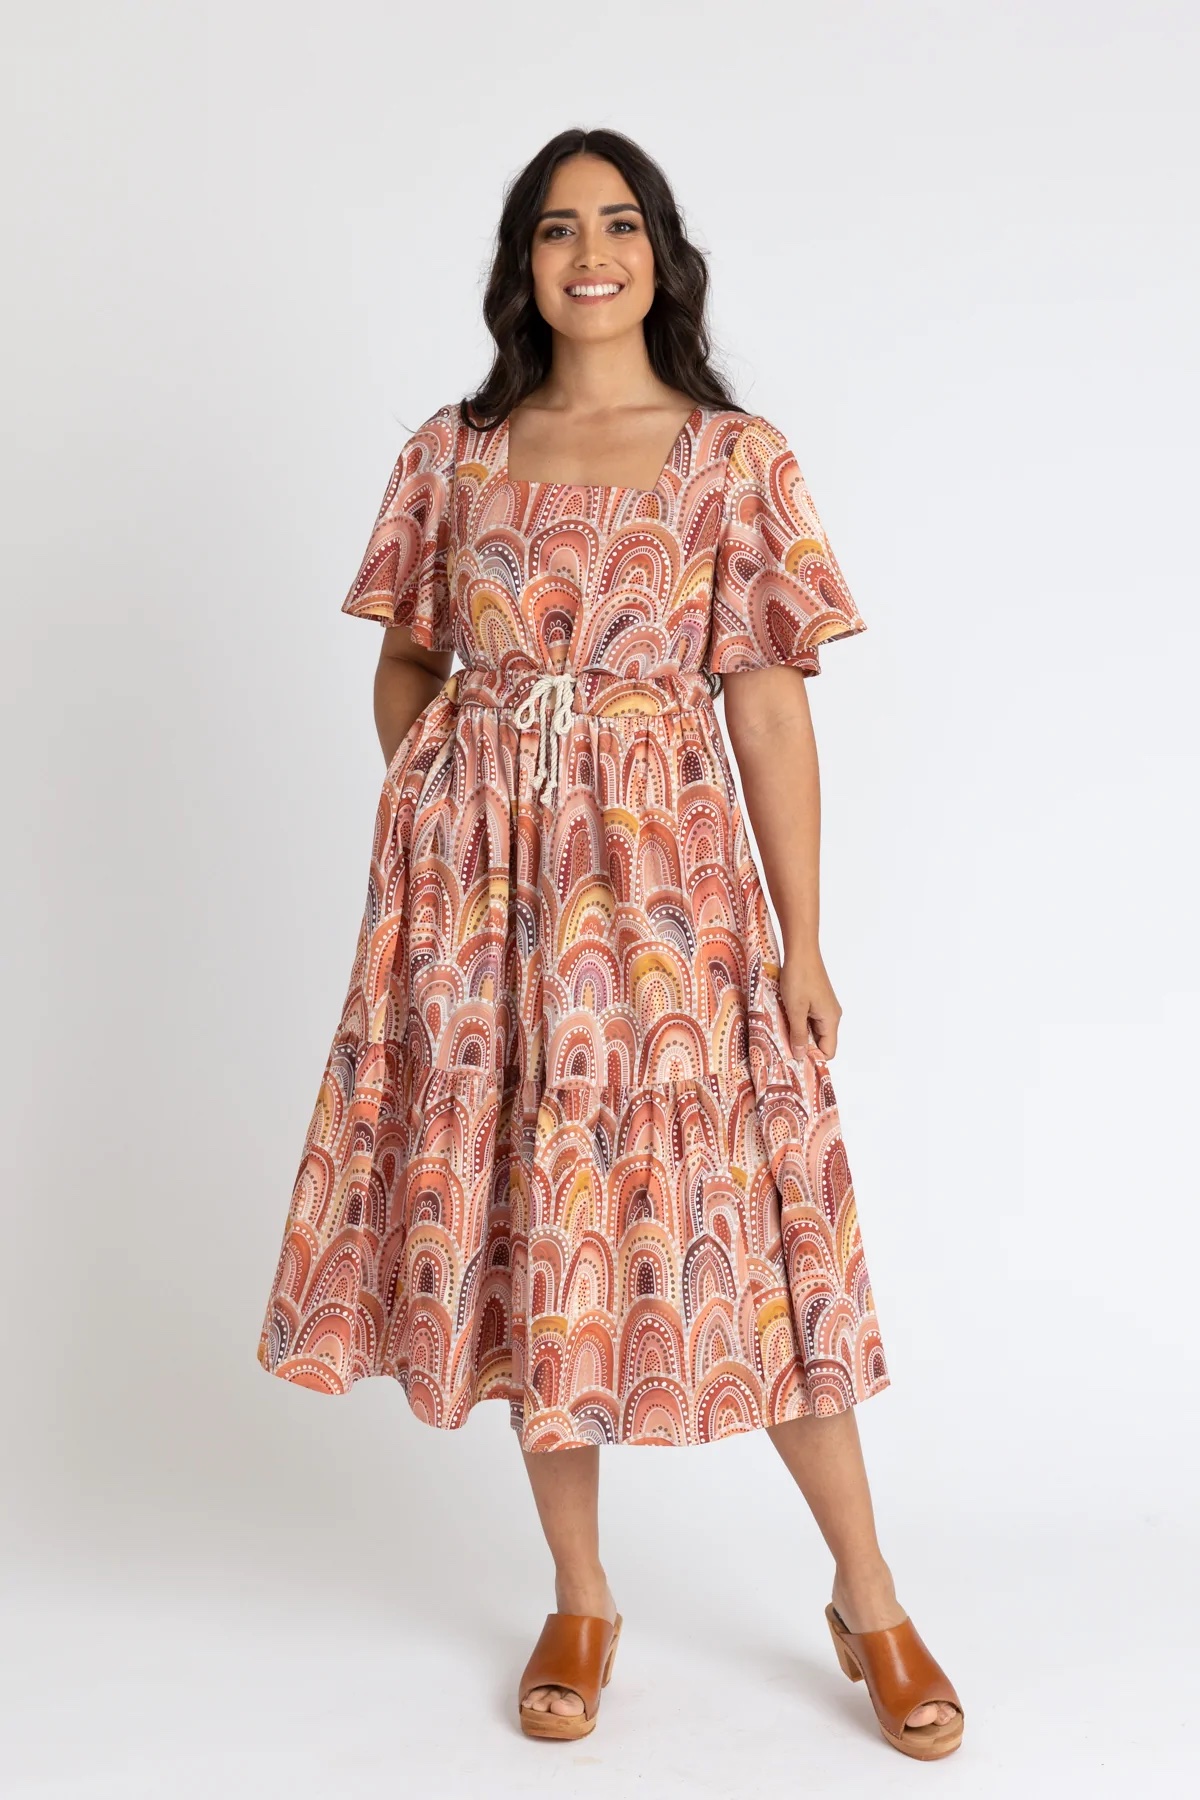 Woman wearing the Protea Dress sewing pattern from Megan Nielsen on The Fold Line. A dress pattern made in cotton, shirting, voile, batiste, lawn, silk, crepe, rayon, chambray or linen fabrics, featuring a square neckline, flutter sleeves, tiered gathered skirt and drawstring.